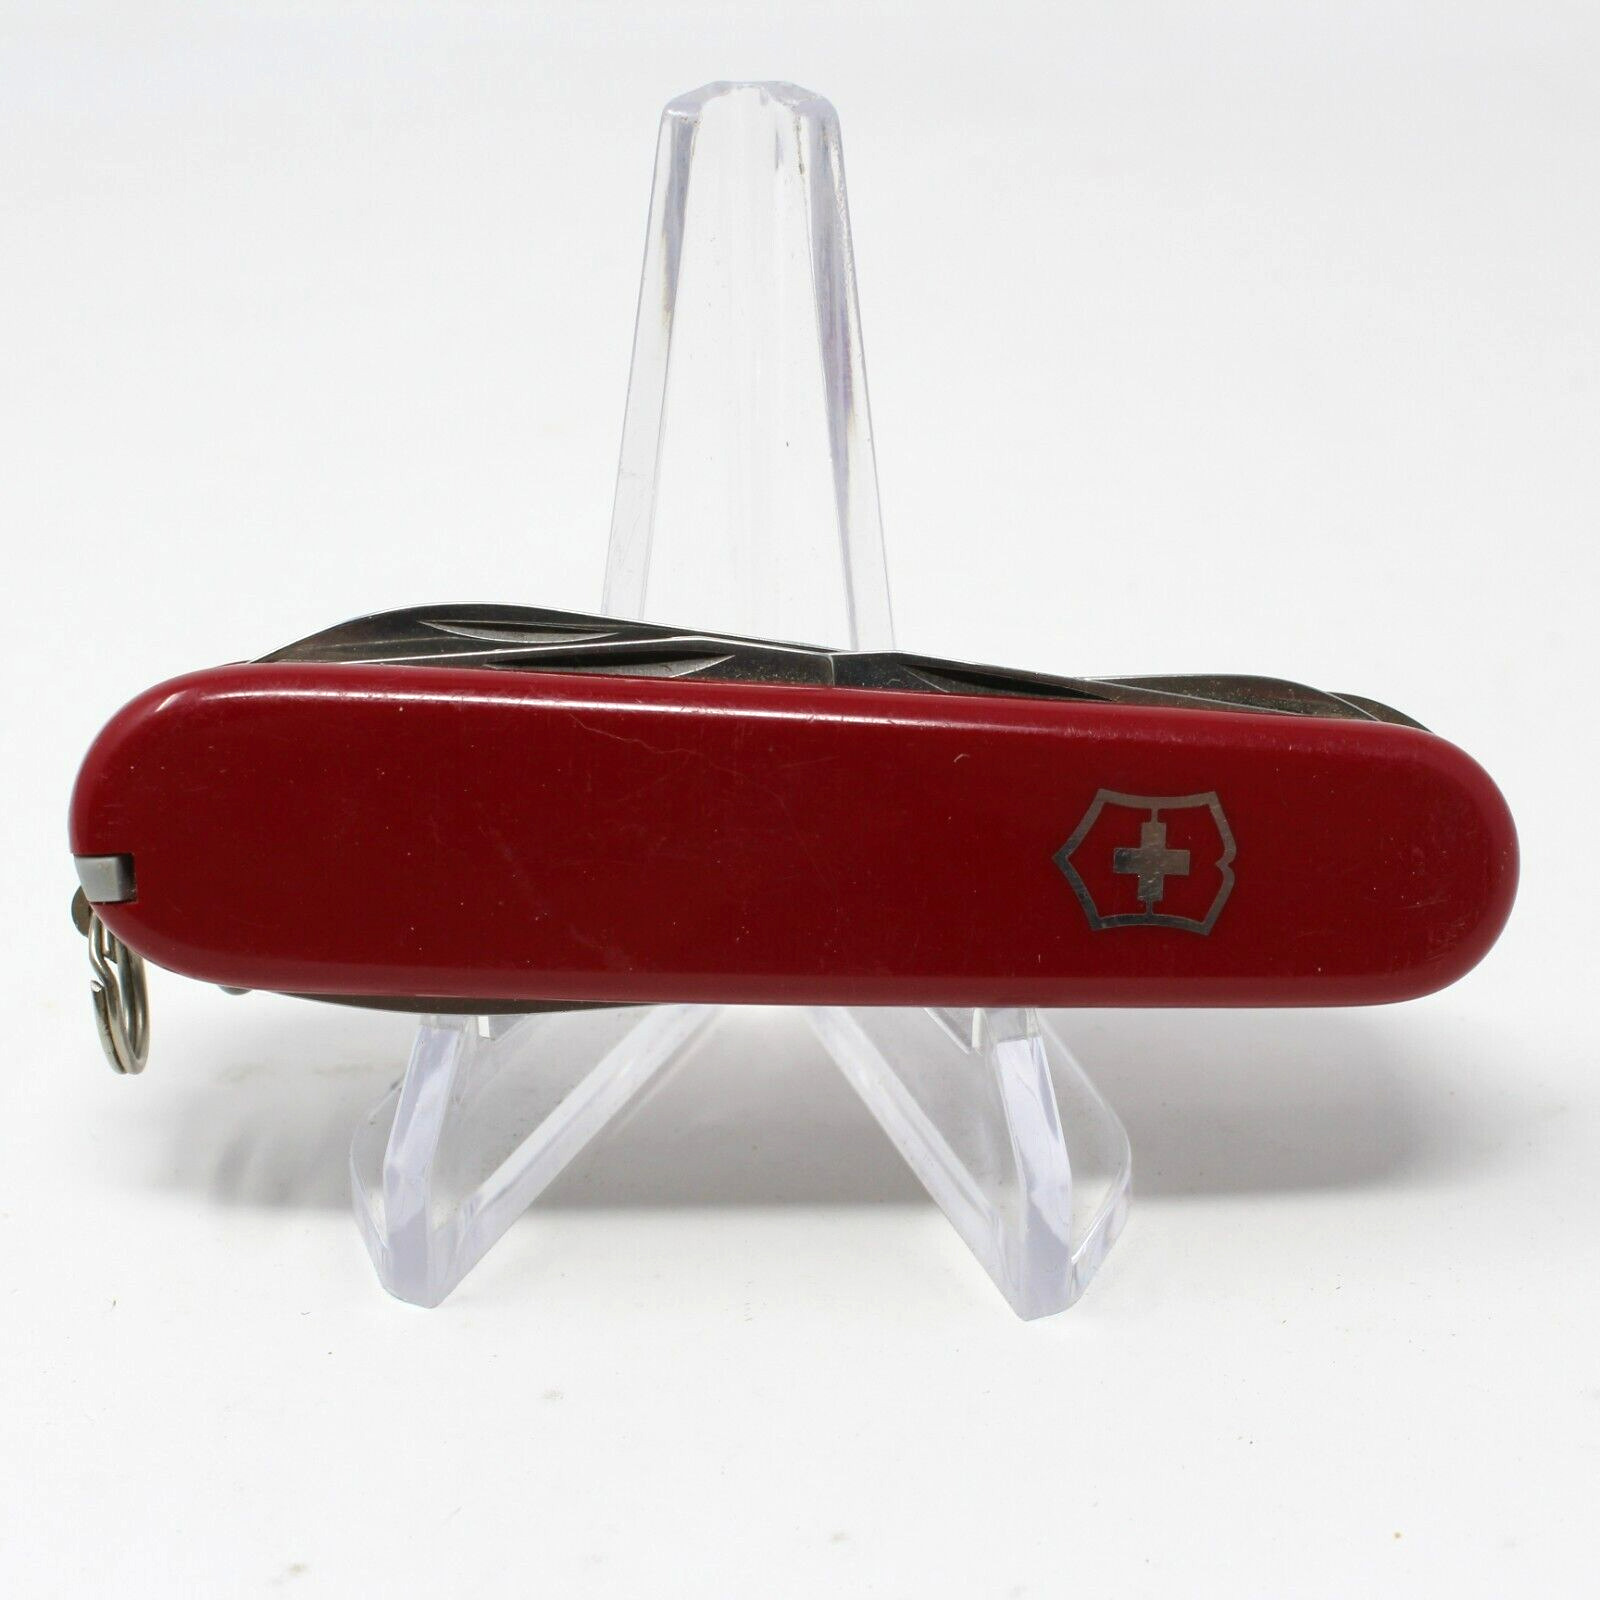 Victorinox Explorer Swiss Army Knife - Red - Vintage - Great Condition